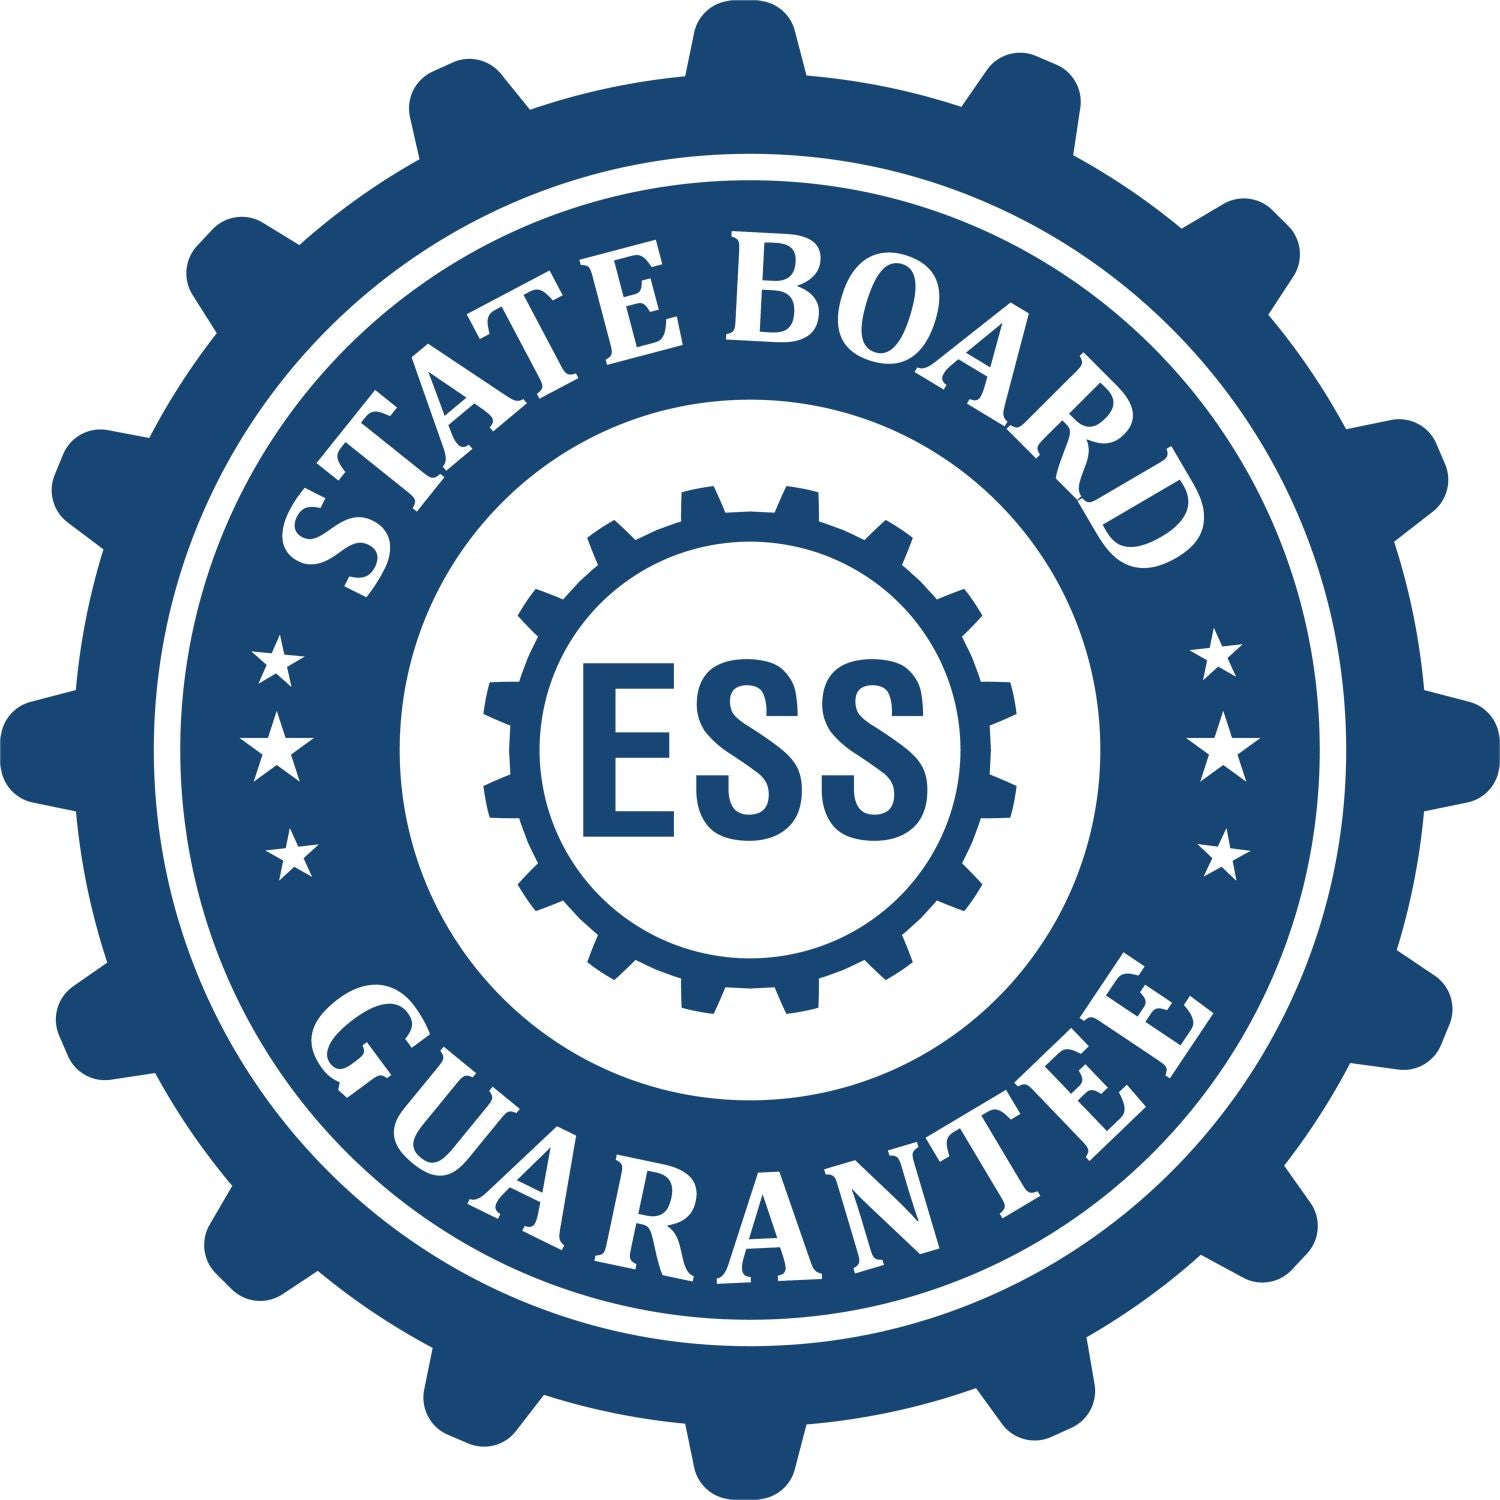 An emblem in a gear shape illustrating a state board guarantee for the Michigan Professional Engineer Seal Stamp product.